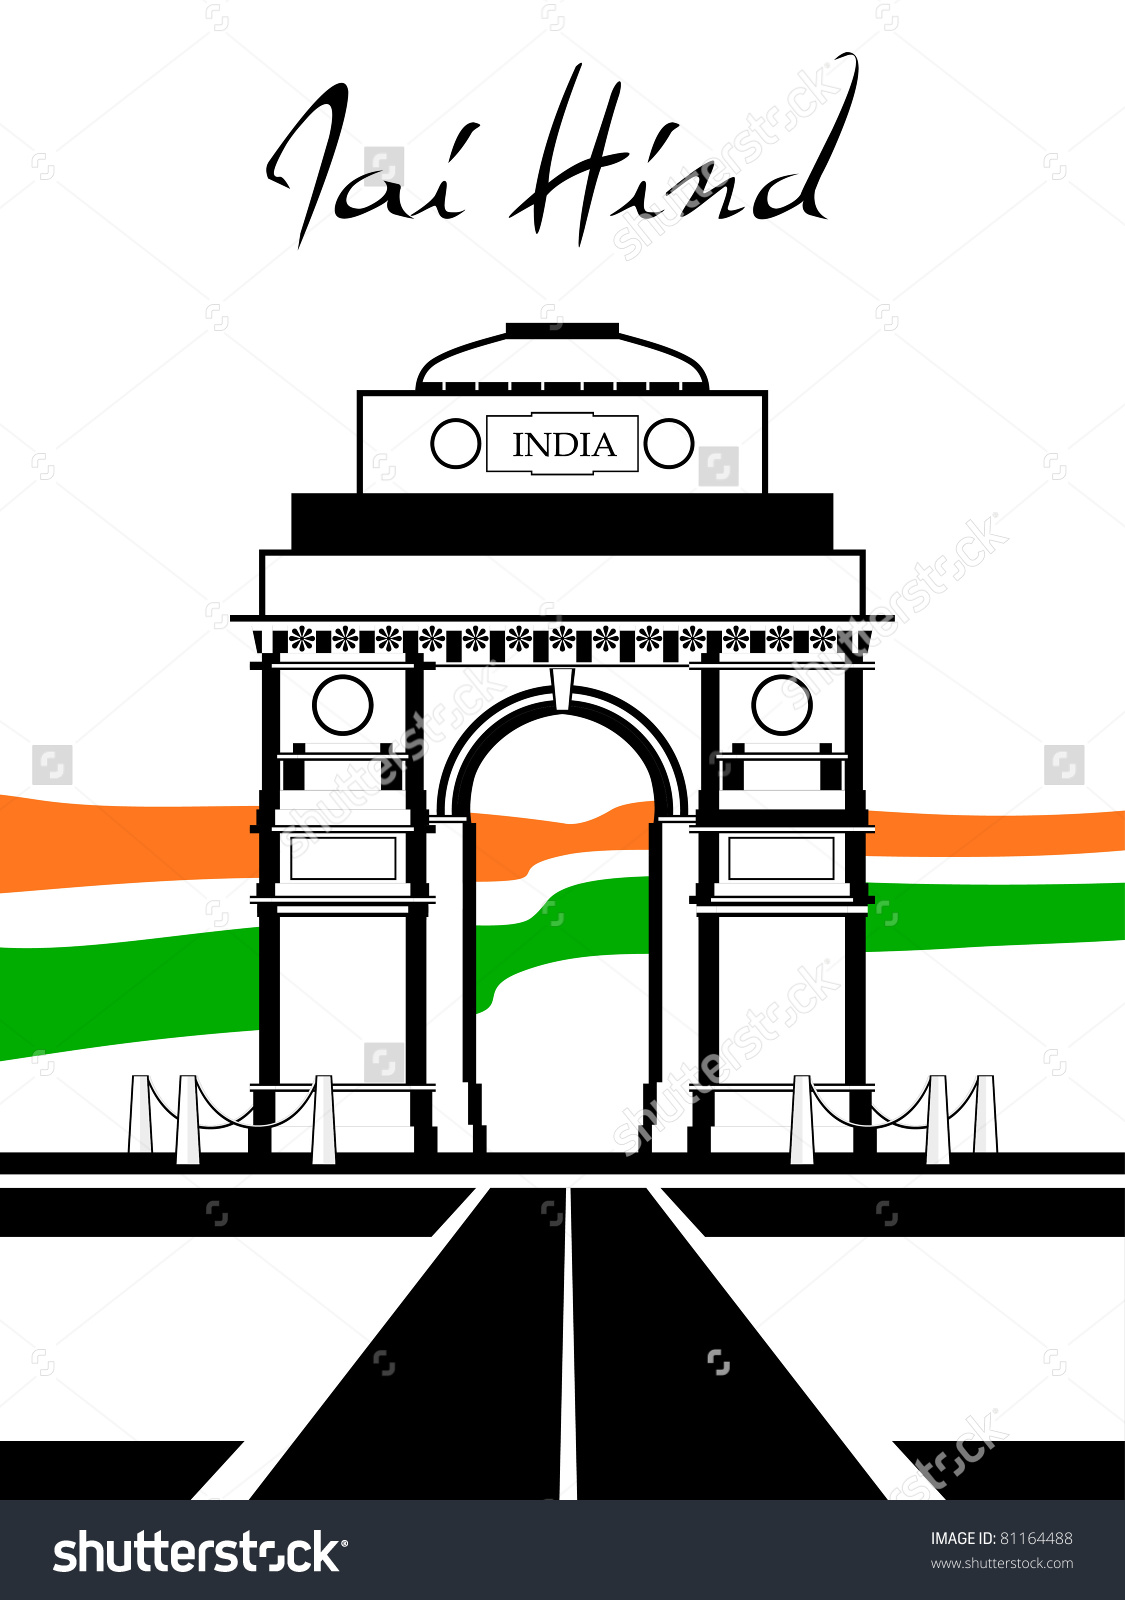 India gate clipart black and white.